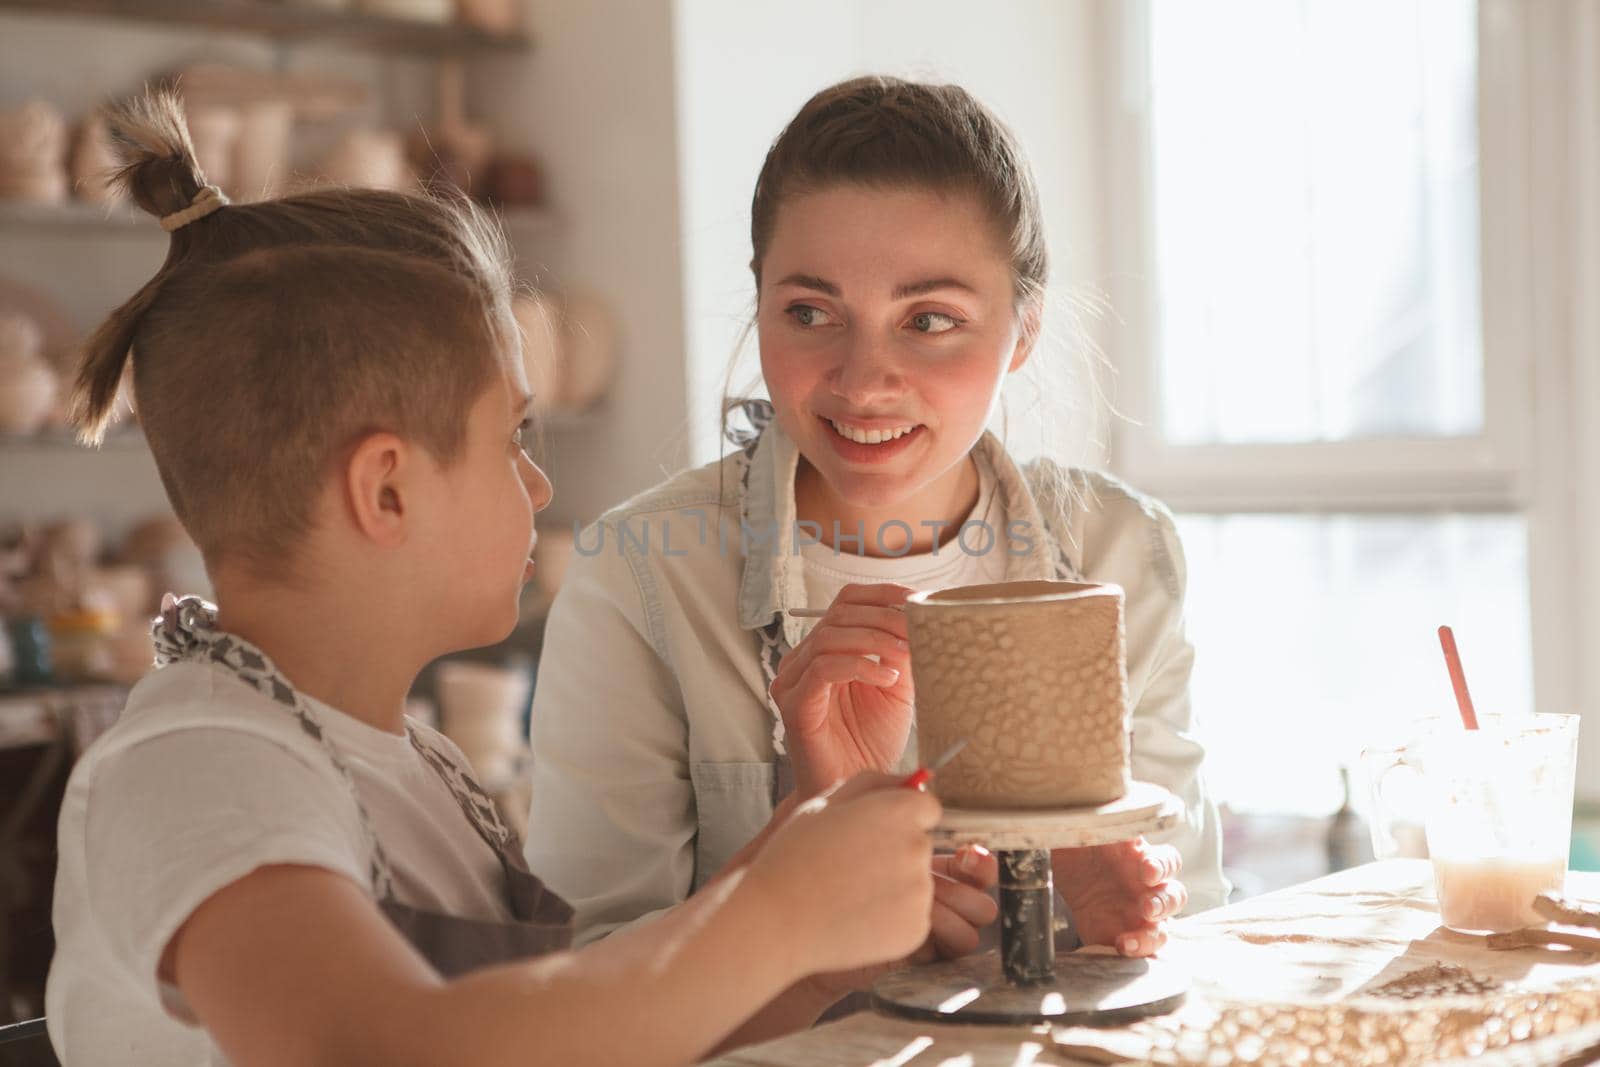 Mother and son smiling at each other while decorating ceramic mug together at art class